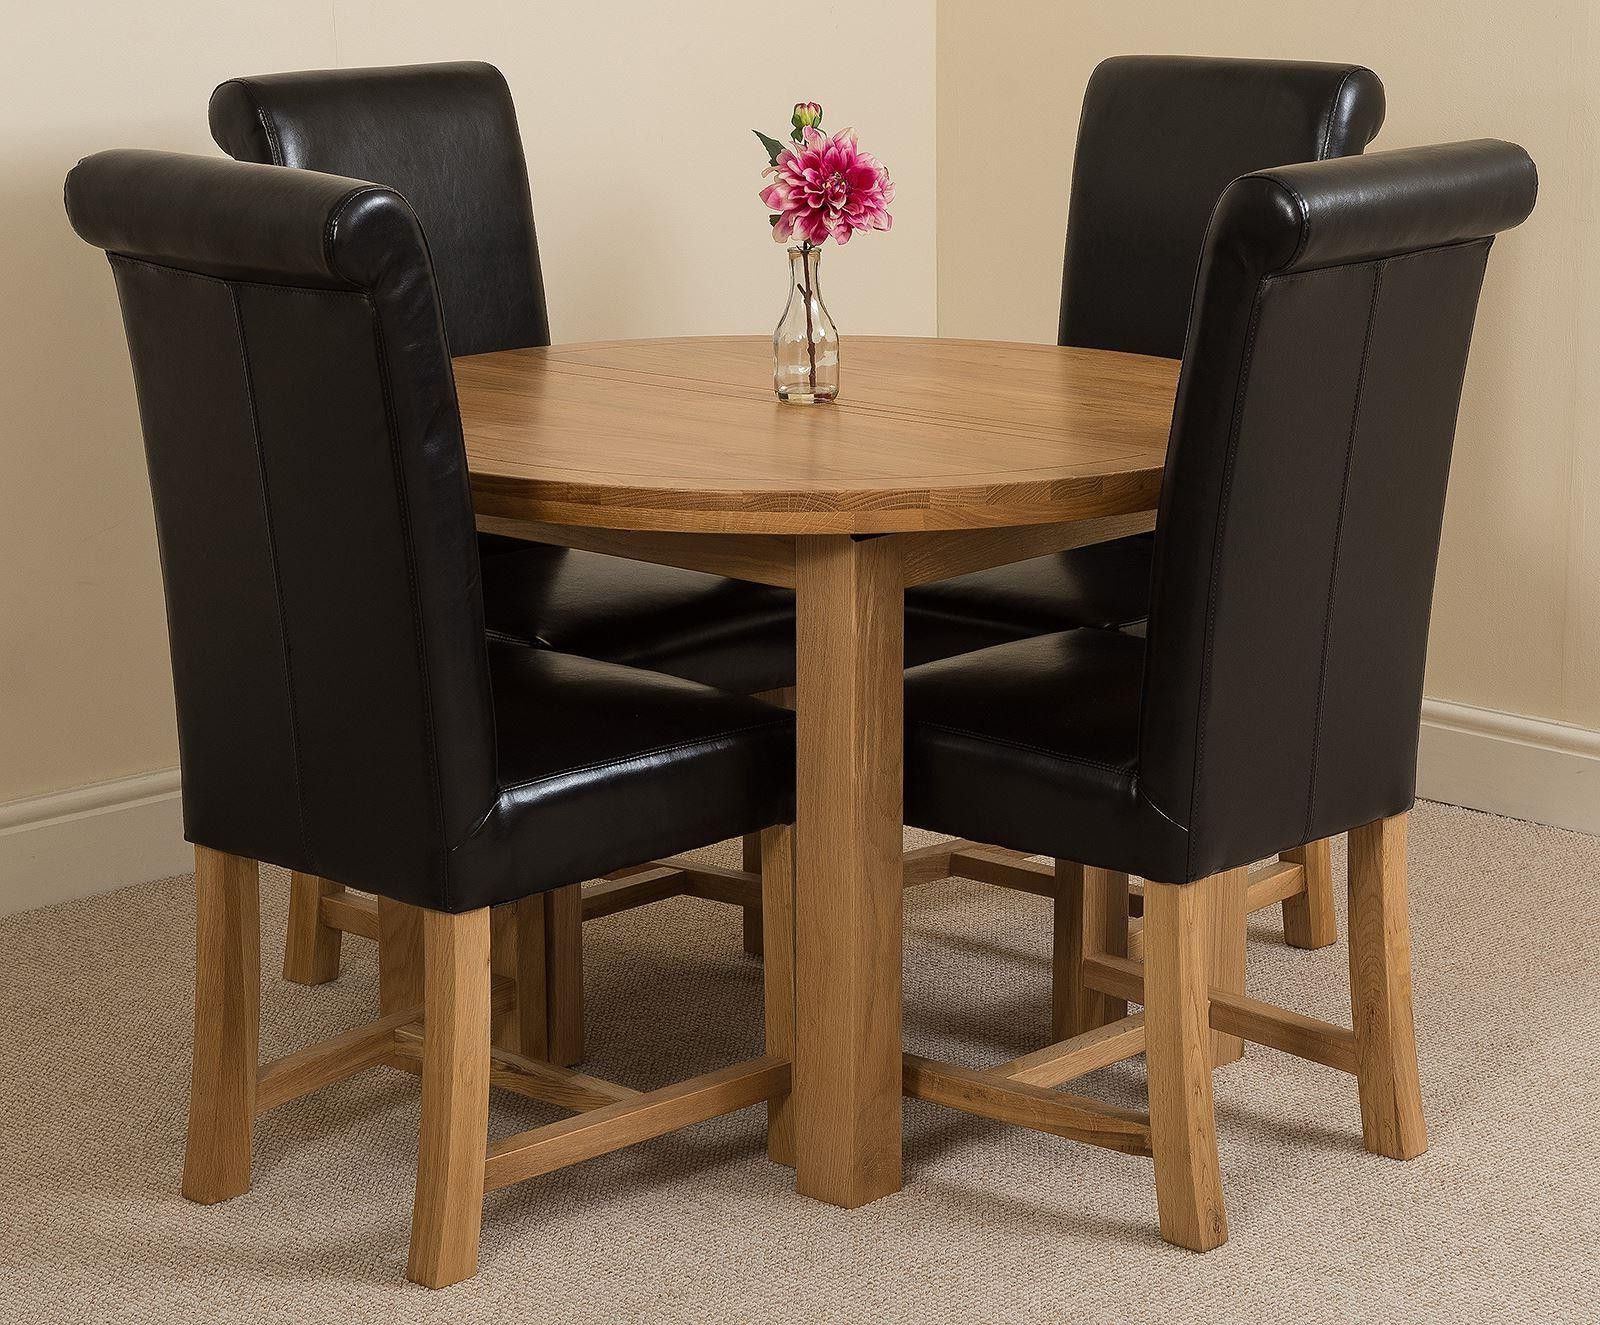 Favorite Edmonton Solid Oak Extending Oval Dining Table With 4 Washington Dining Intended For Extendable Oval Patio Dining Sets (View 2 of 15)